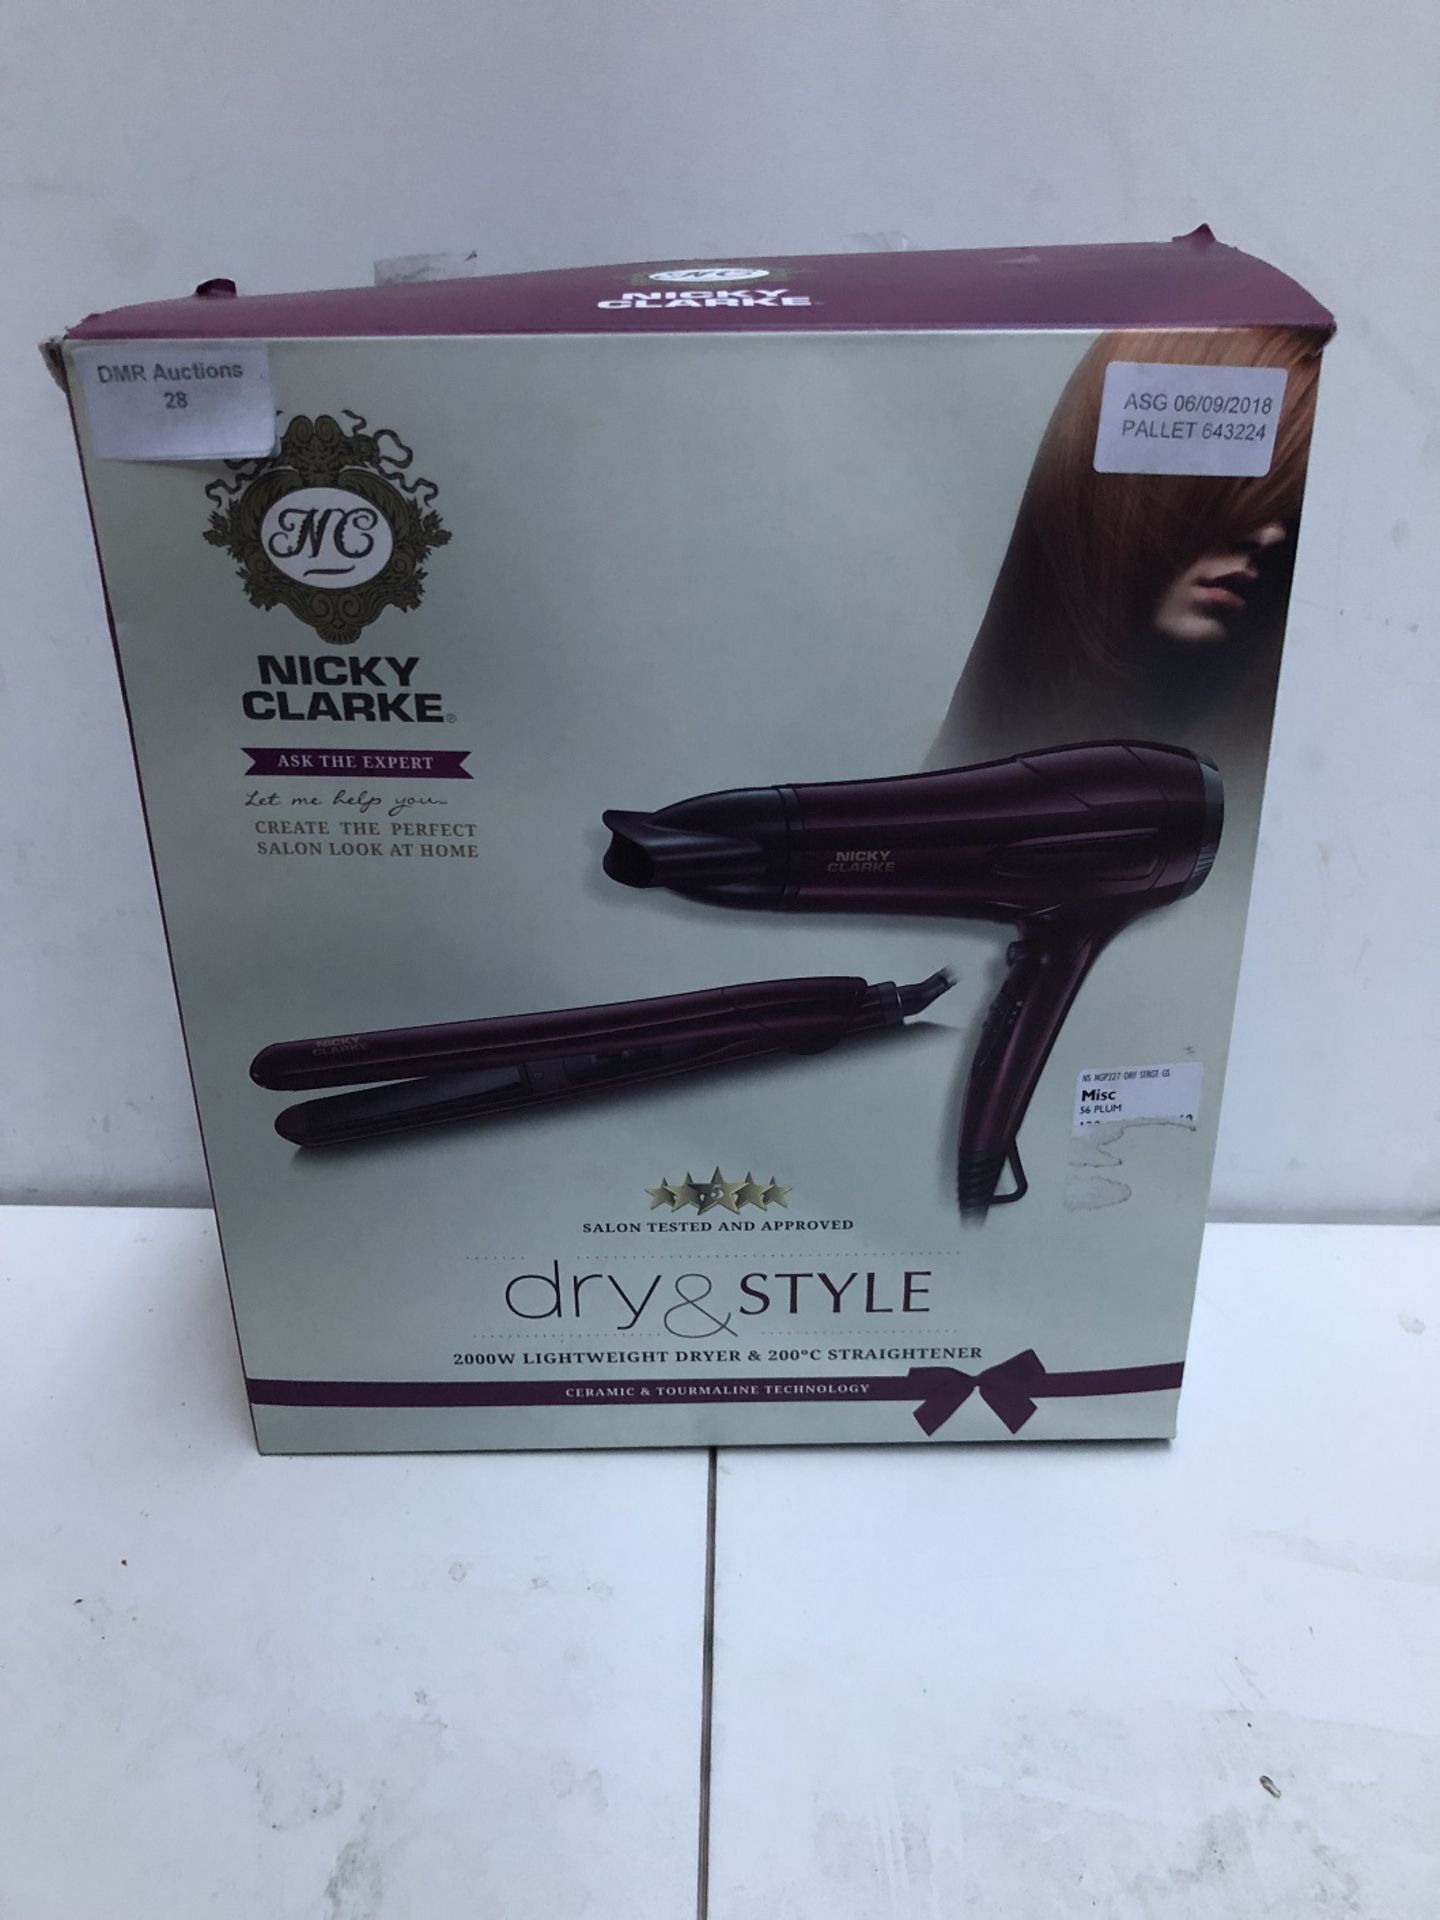 1 / NICKY CLARKE DRYER AND STRAIGHTENER GIFT SET RRP £37 / ASG 06/09/18 PALLET 643224 (VIEWING